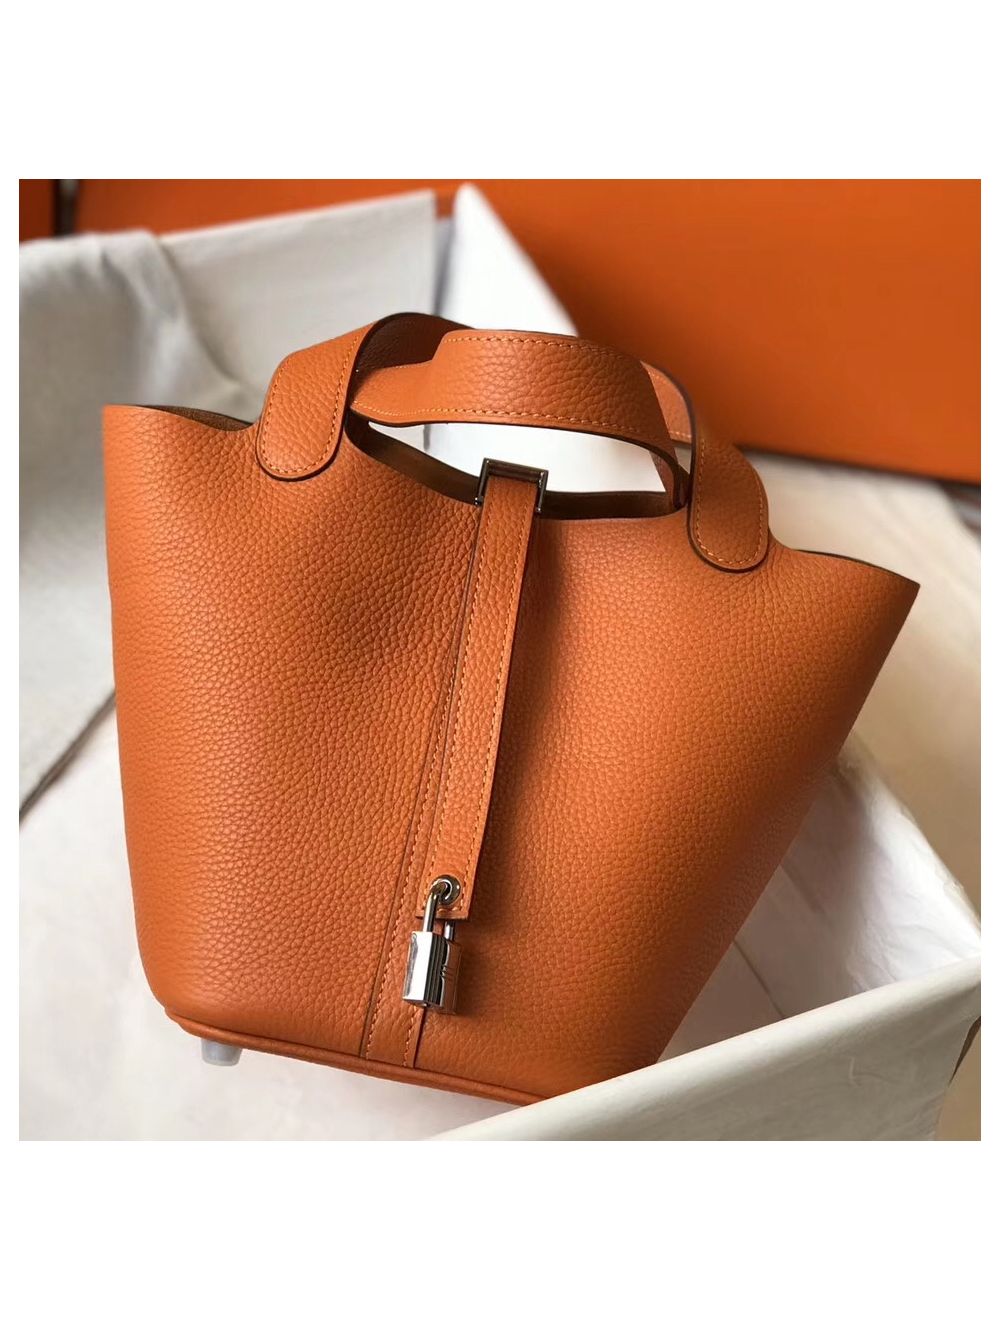 My Paris Time Square - Hermes Picotin 18 Orange Clemence Leather Stamp R  Product Code : B13569 Condition :95% New Size : 18Lx 20H x 13 W cm My Paris  Price 